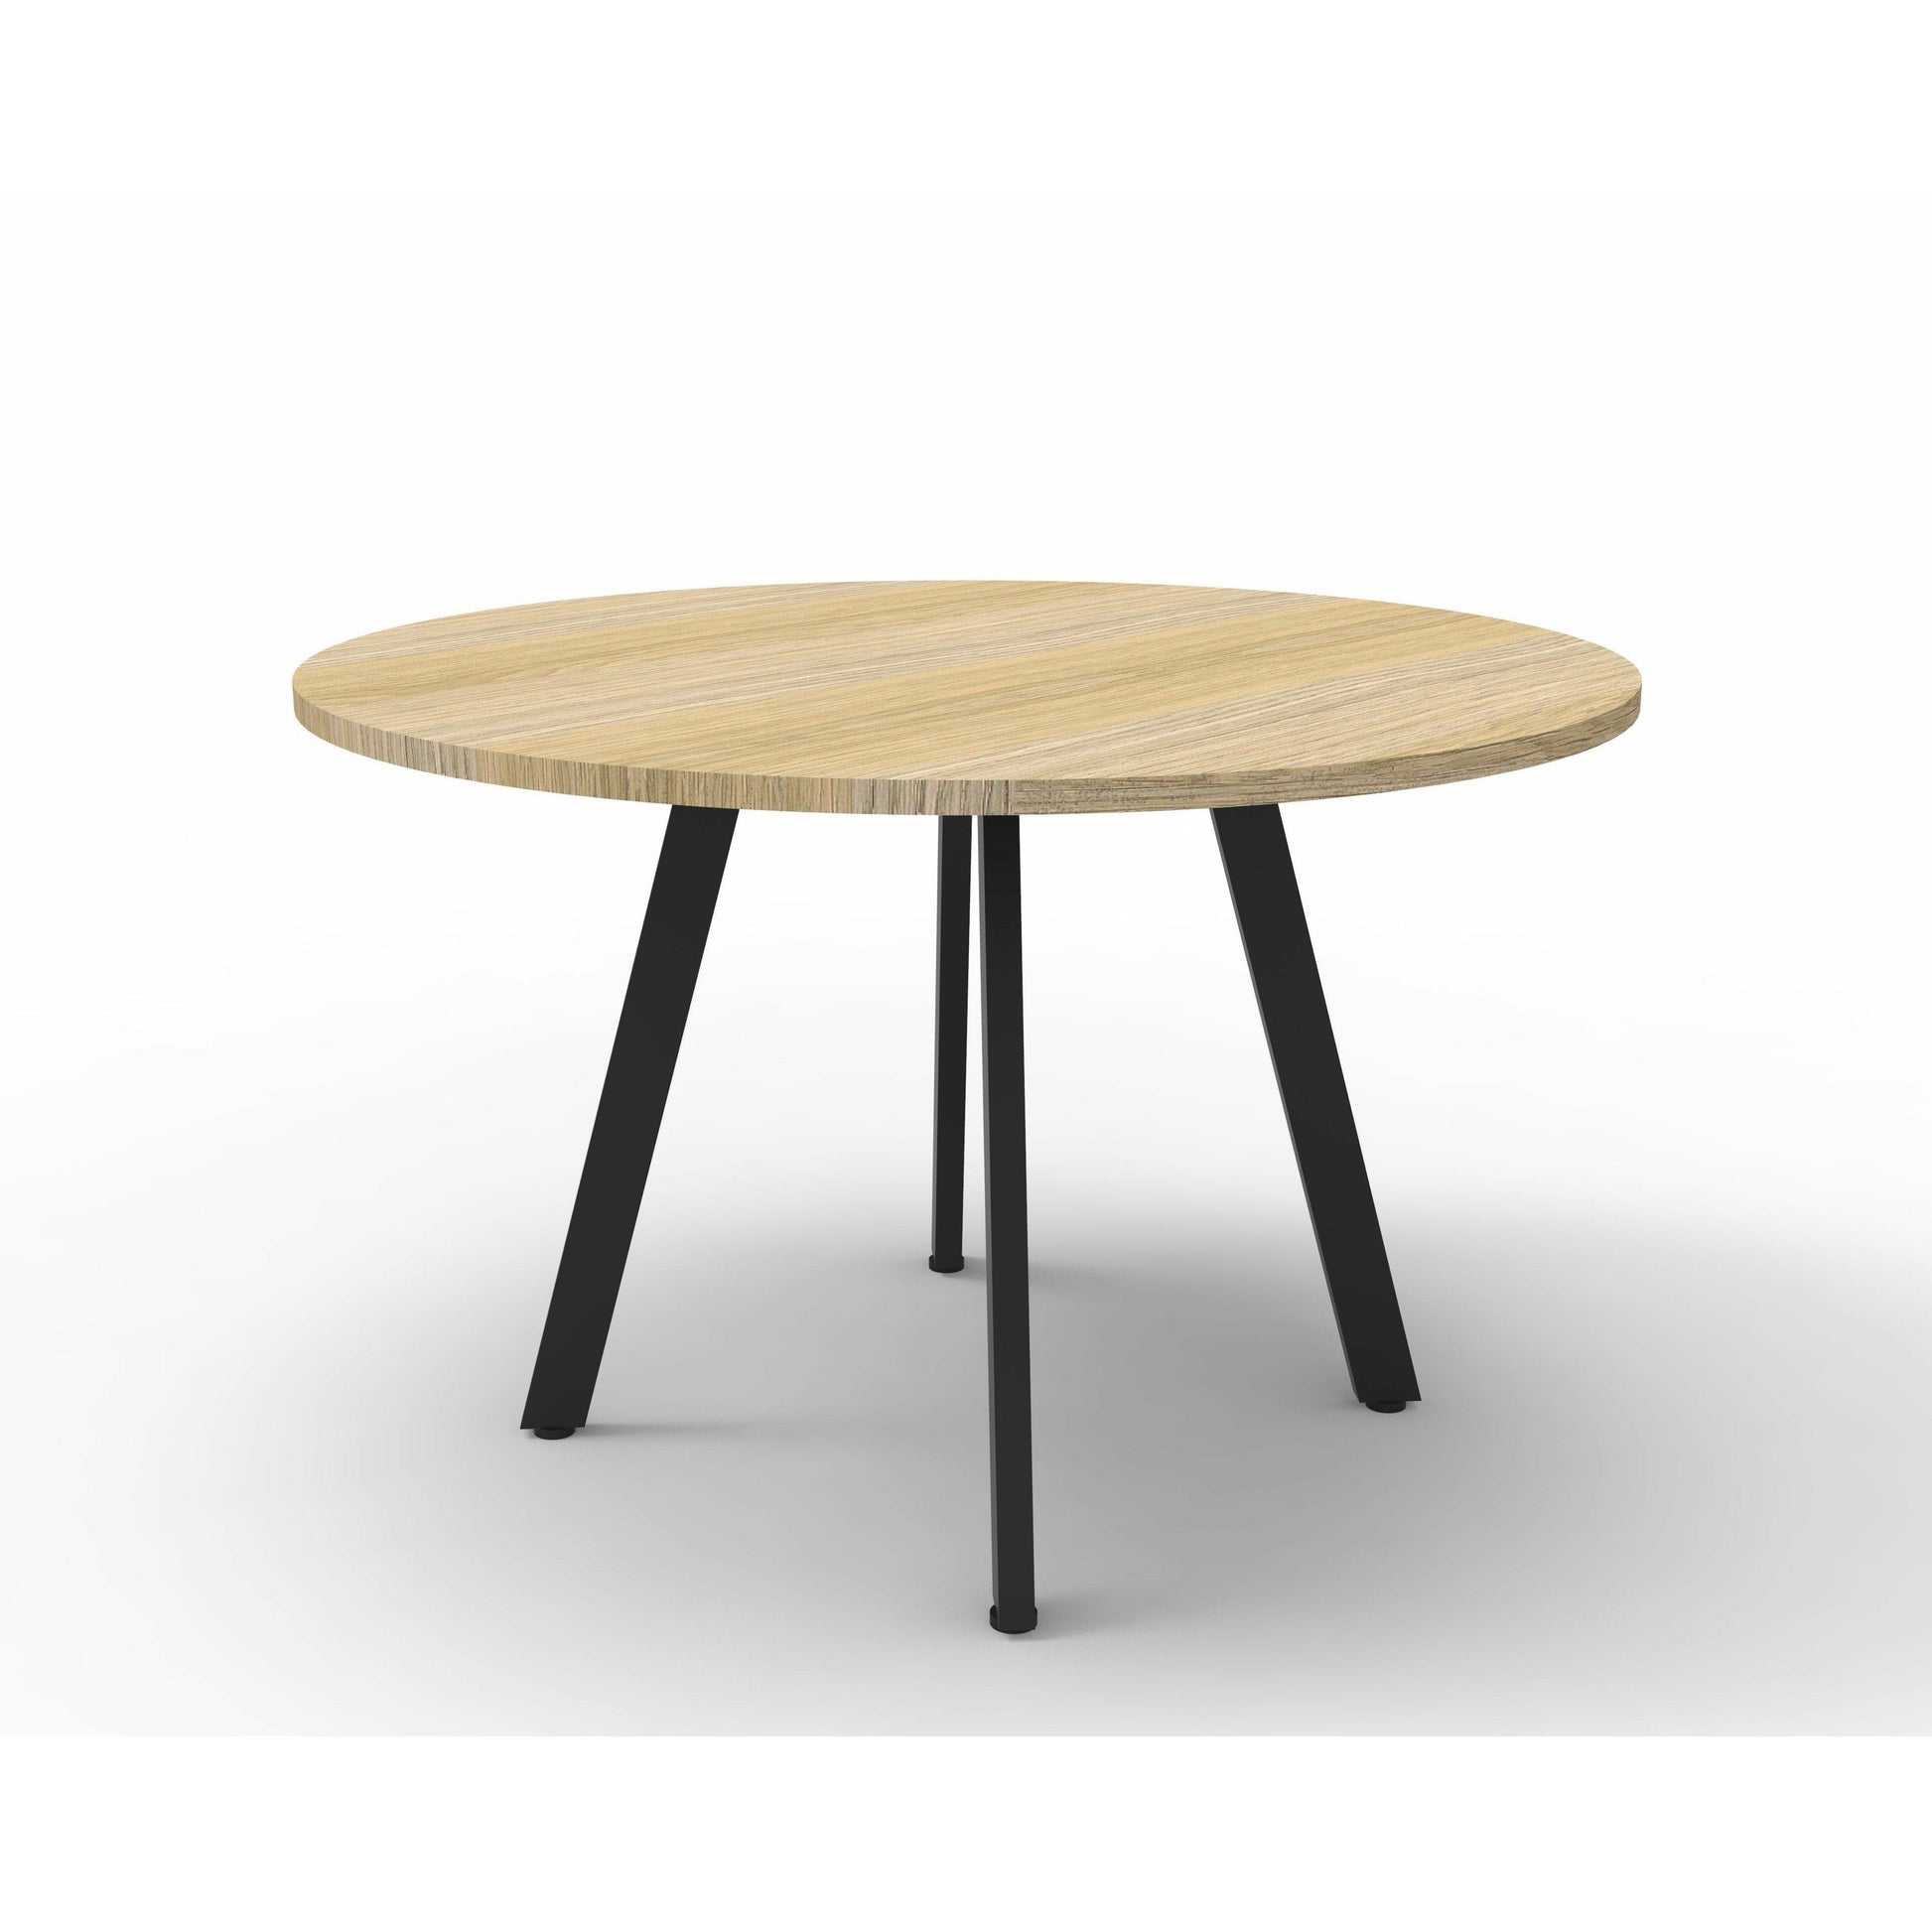 Eternity Small Meeting Table - Office Furniture Company 